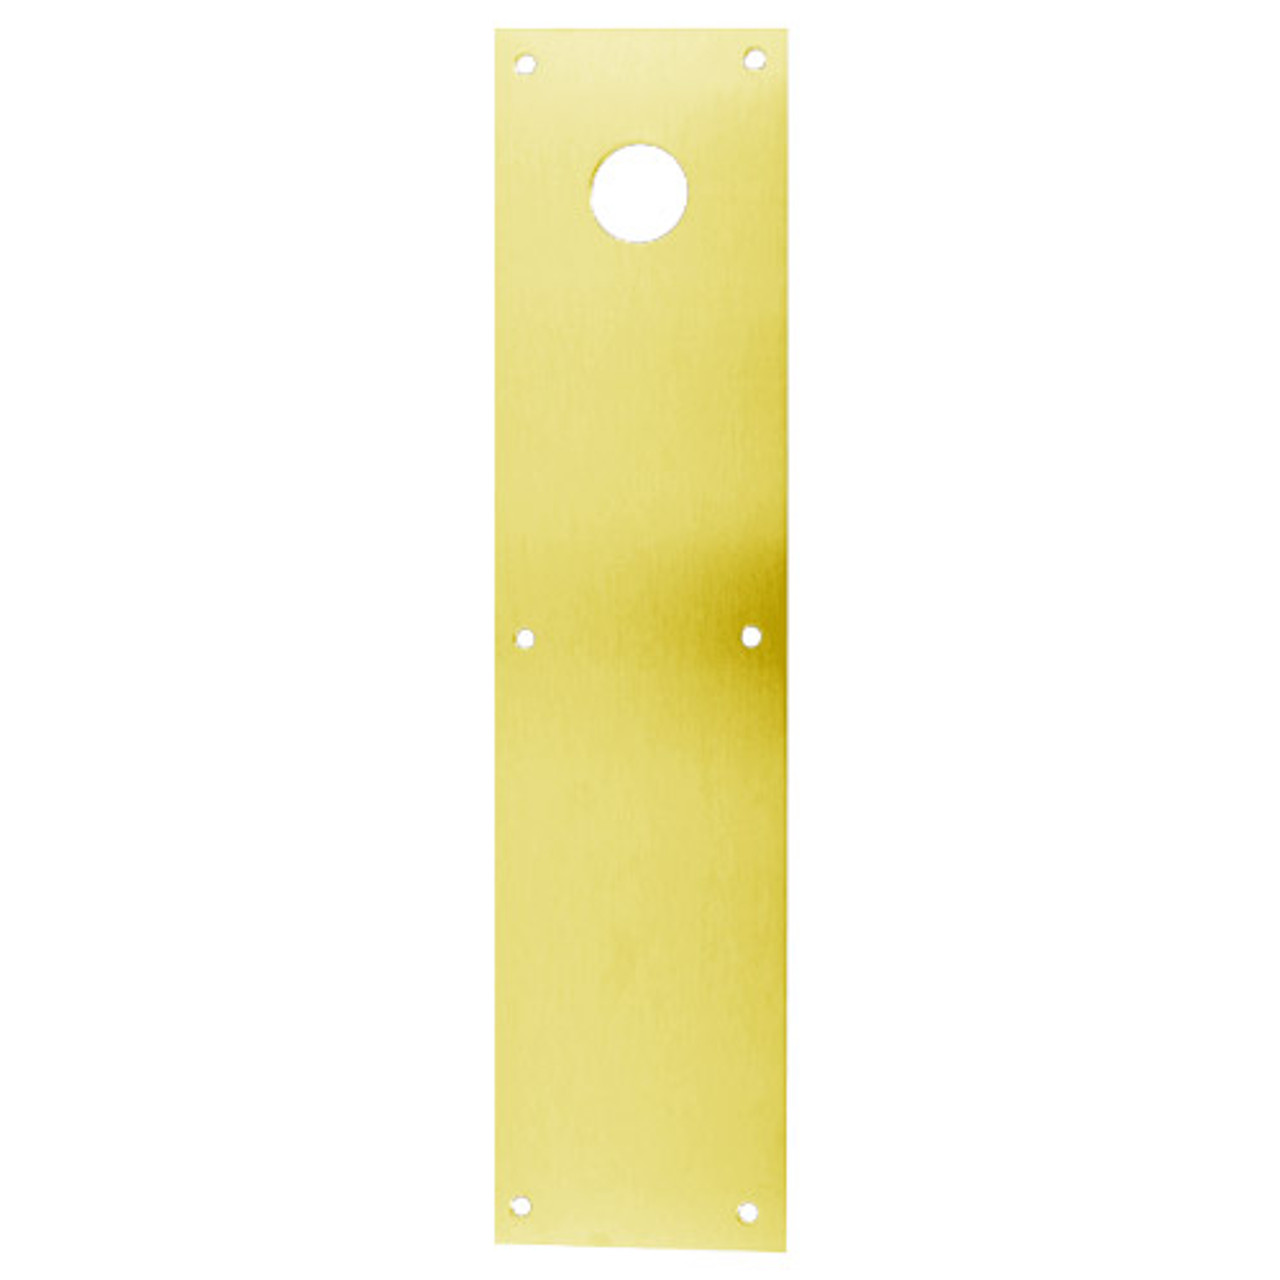 CFK70-605 Don Jo Push Plates with Holes in Bright Brass Finish